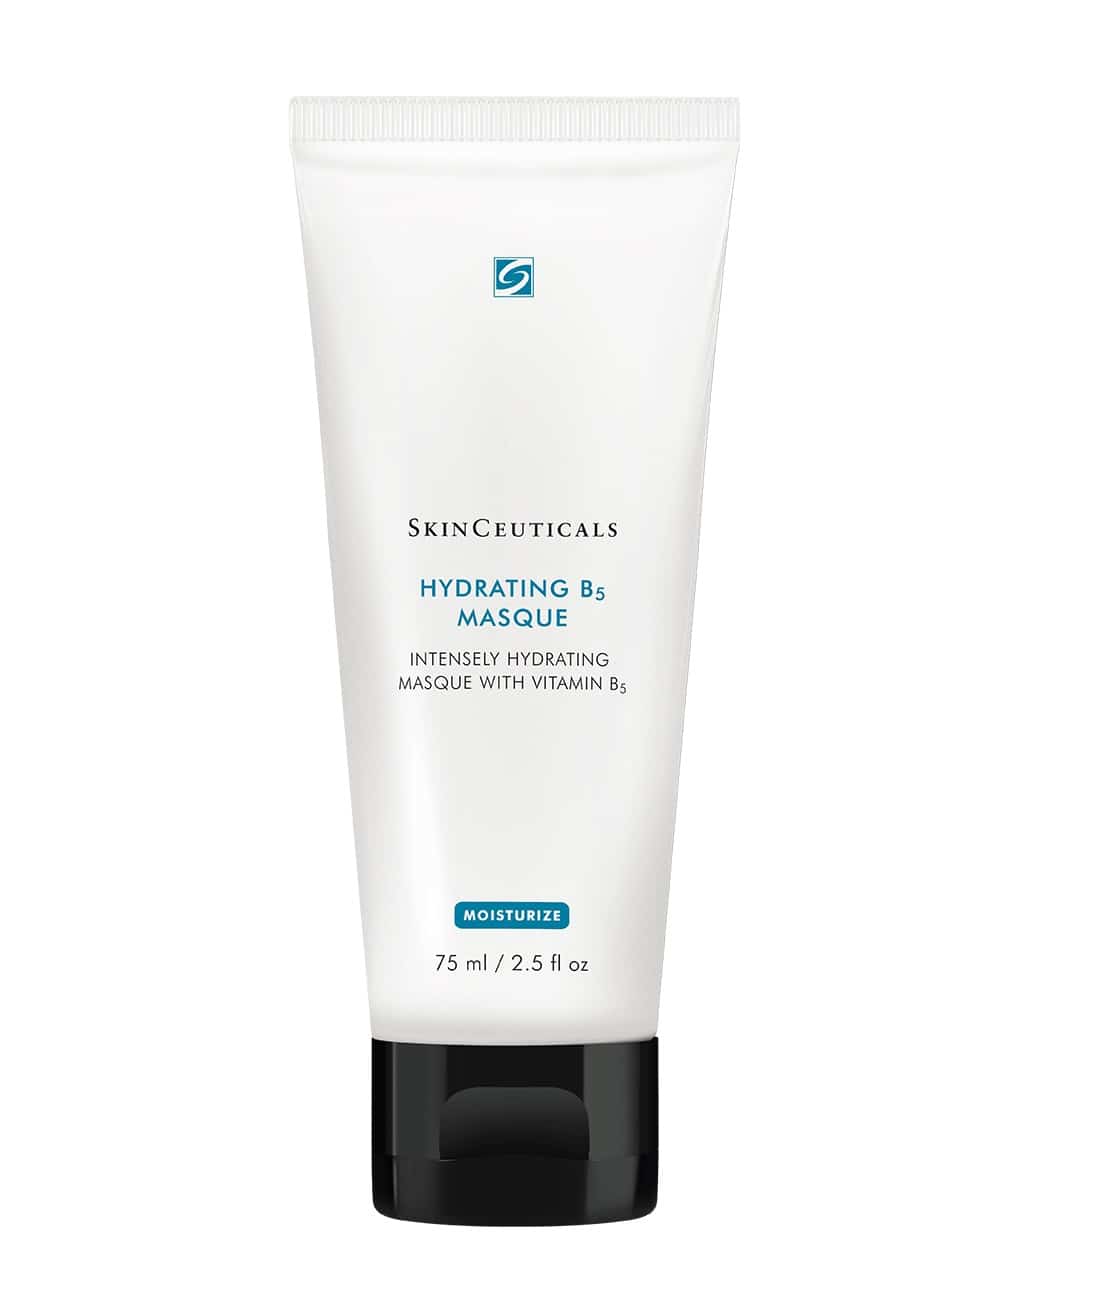 Skinceuticals Hydrating B5 Masque - Hydraterend Masker